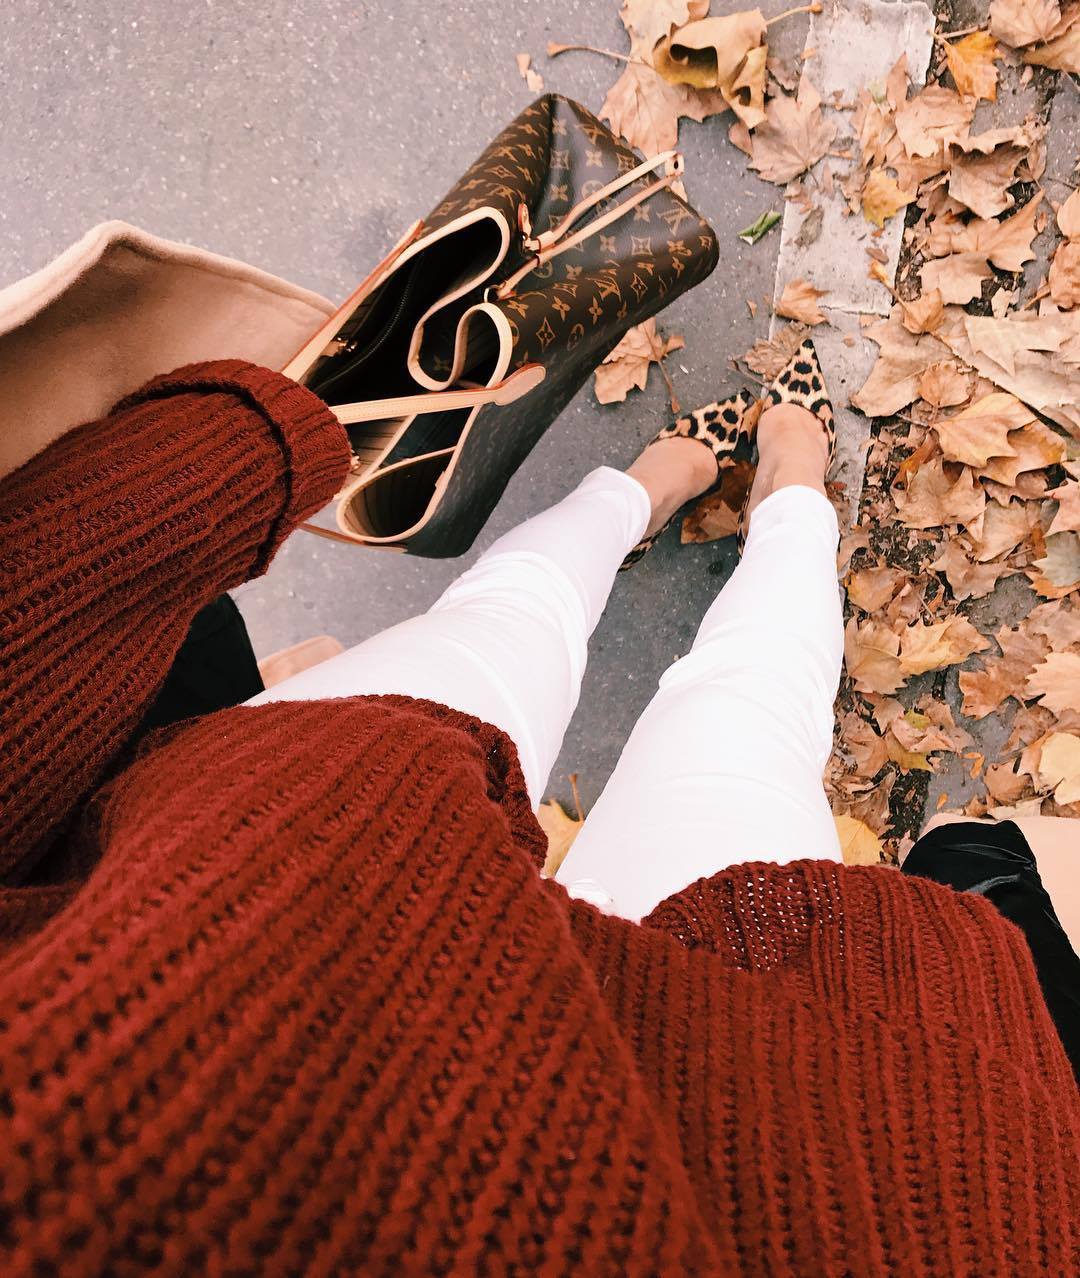 Massive Instagram Round-Up (November - December) | The Sweetest Thing